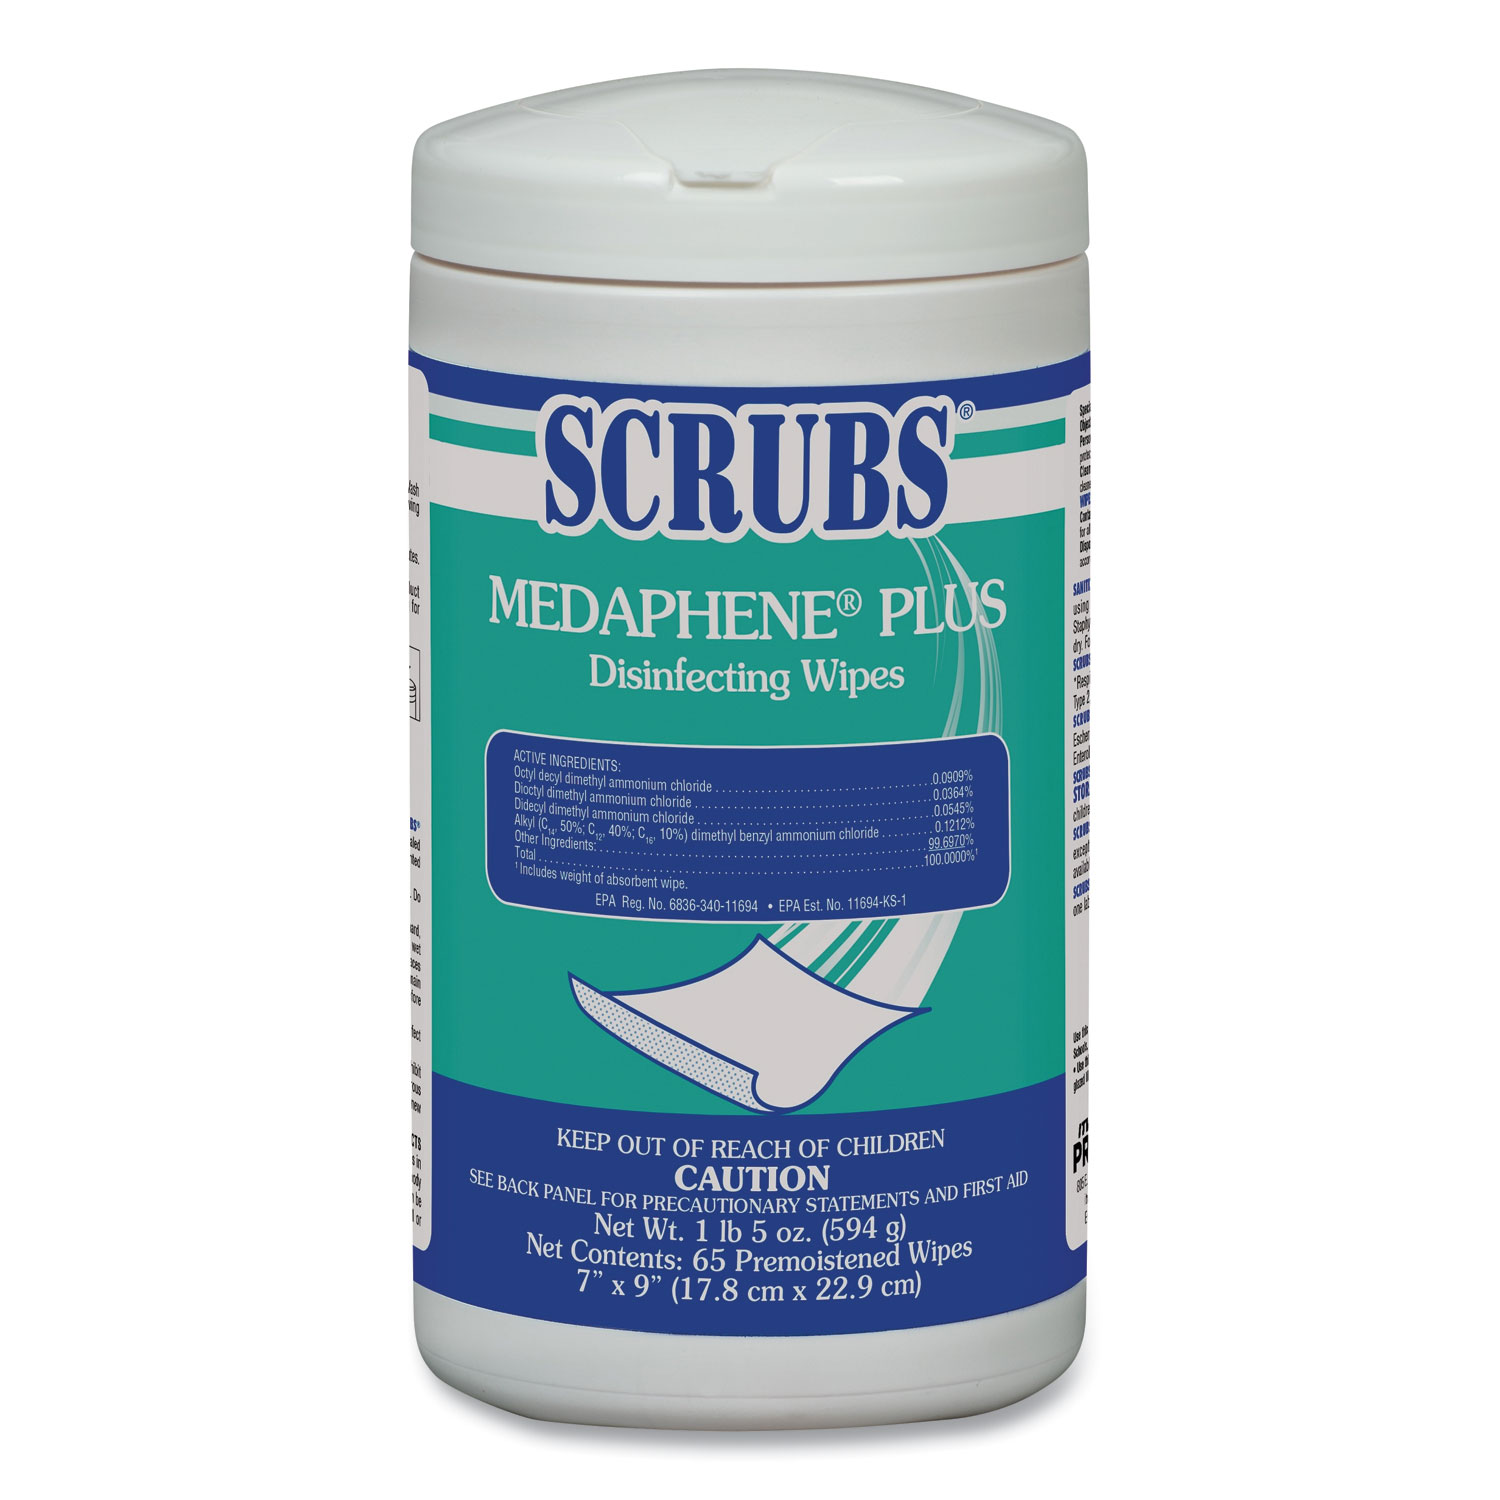  SCRUBS 96365 MEDAPHENE Plus Disinfecting Wipes, Citrus, 8 x 7, White, 65/Canister, 6/Carton (ITW96365) 